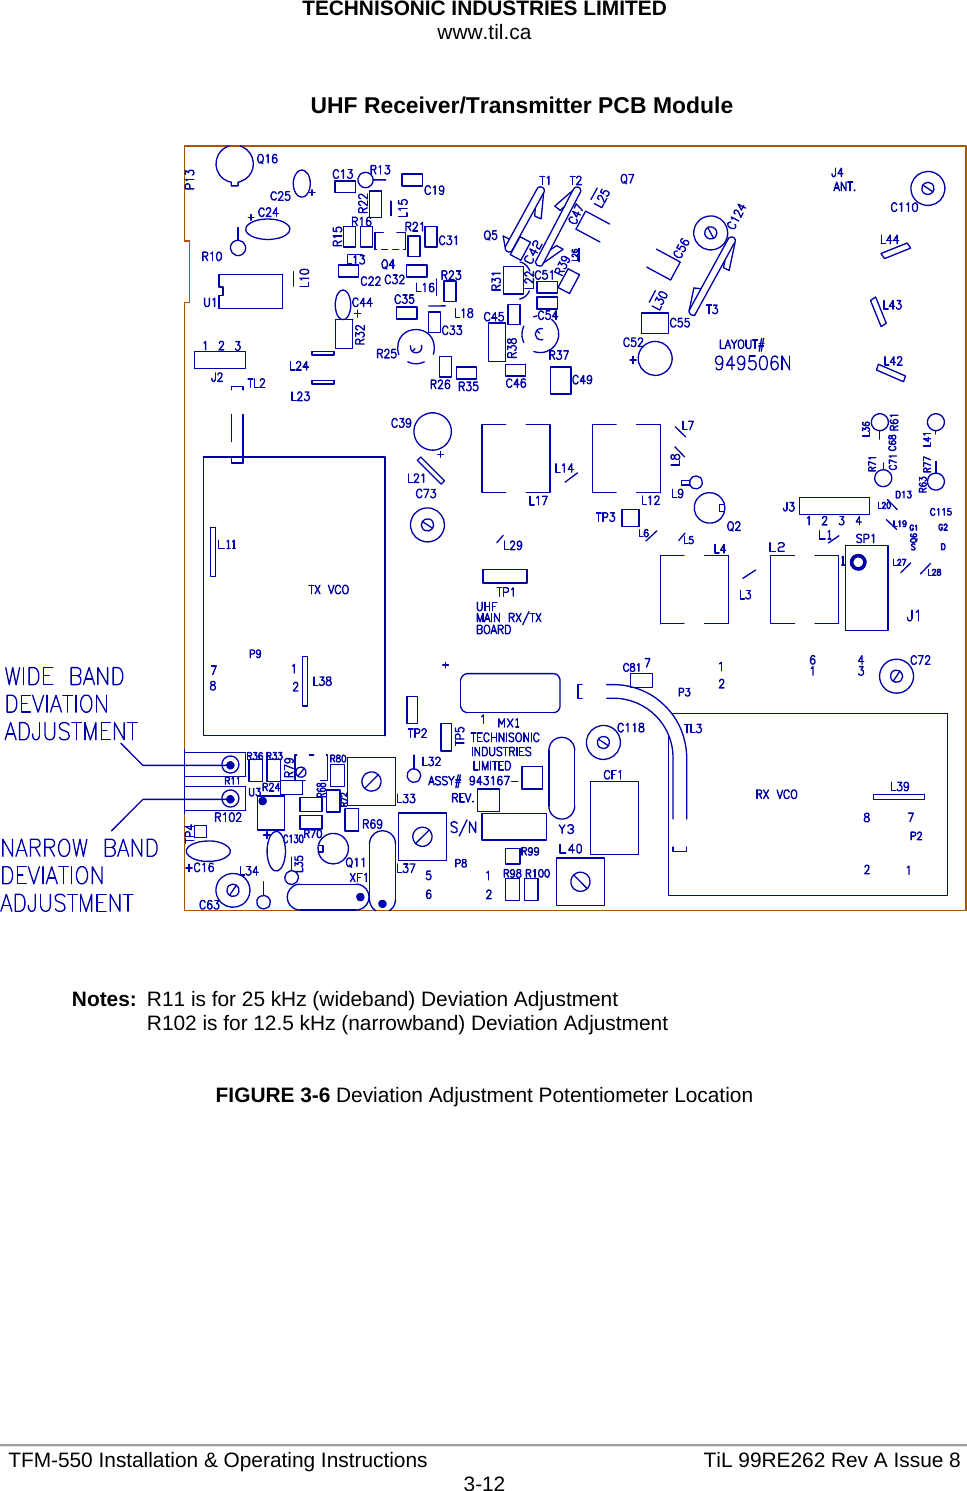 TECHNISONIC INDUSTRIES LIMITED www.til.ca   TFM-550 Installation &amp; Operating Instructions  TiL 99RE262 Rev A Issue 83-12  UHF Receiver/Transmitter PCB Module      Notes:  R11 is for 25 kHz (wideband) Deviation Adjustment R102 is for 12.5 kHz (narrowband) Deviation Adjustment   FIGURE 3-6 Deviation Adjustment Potentiometer Location            